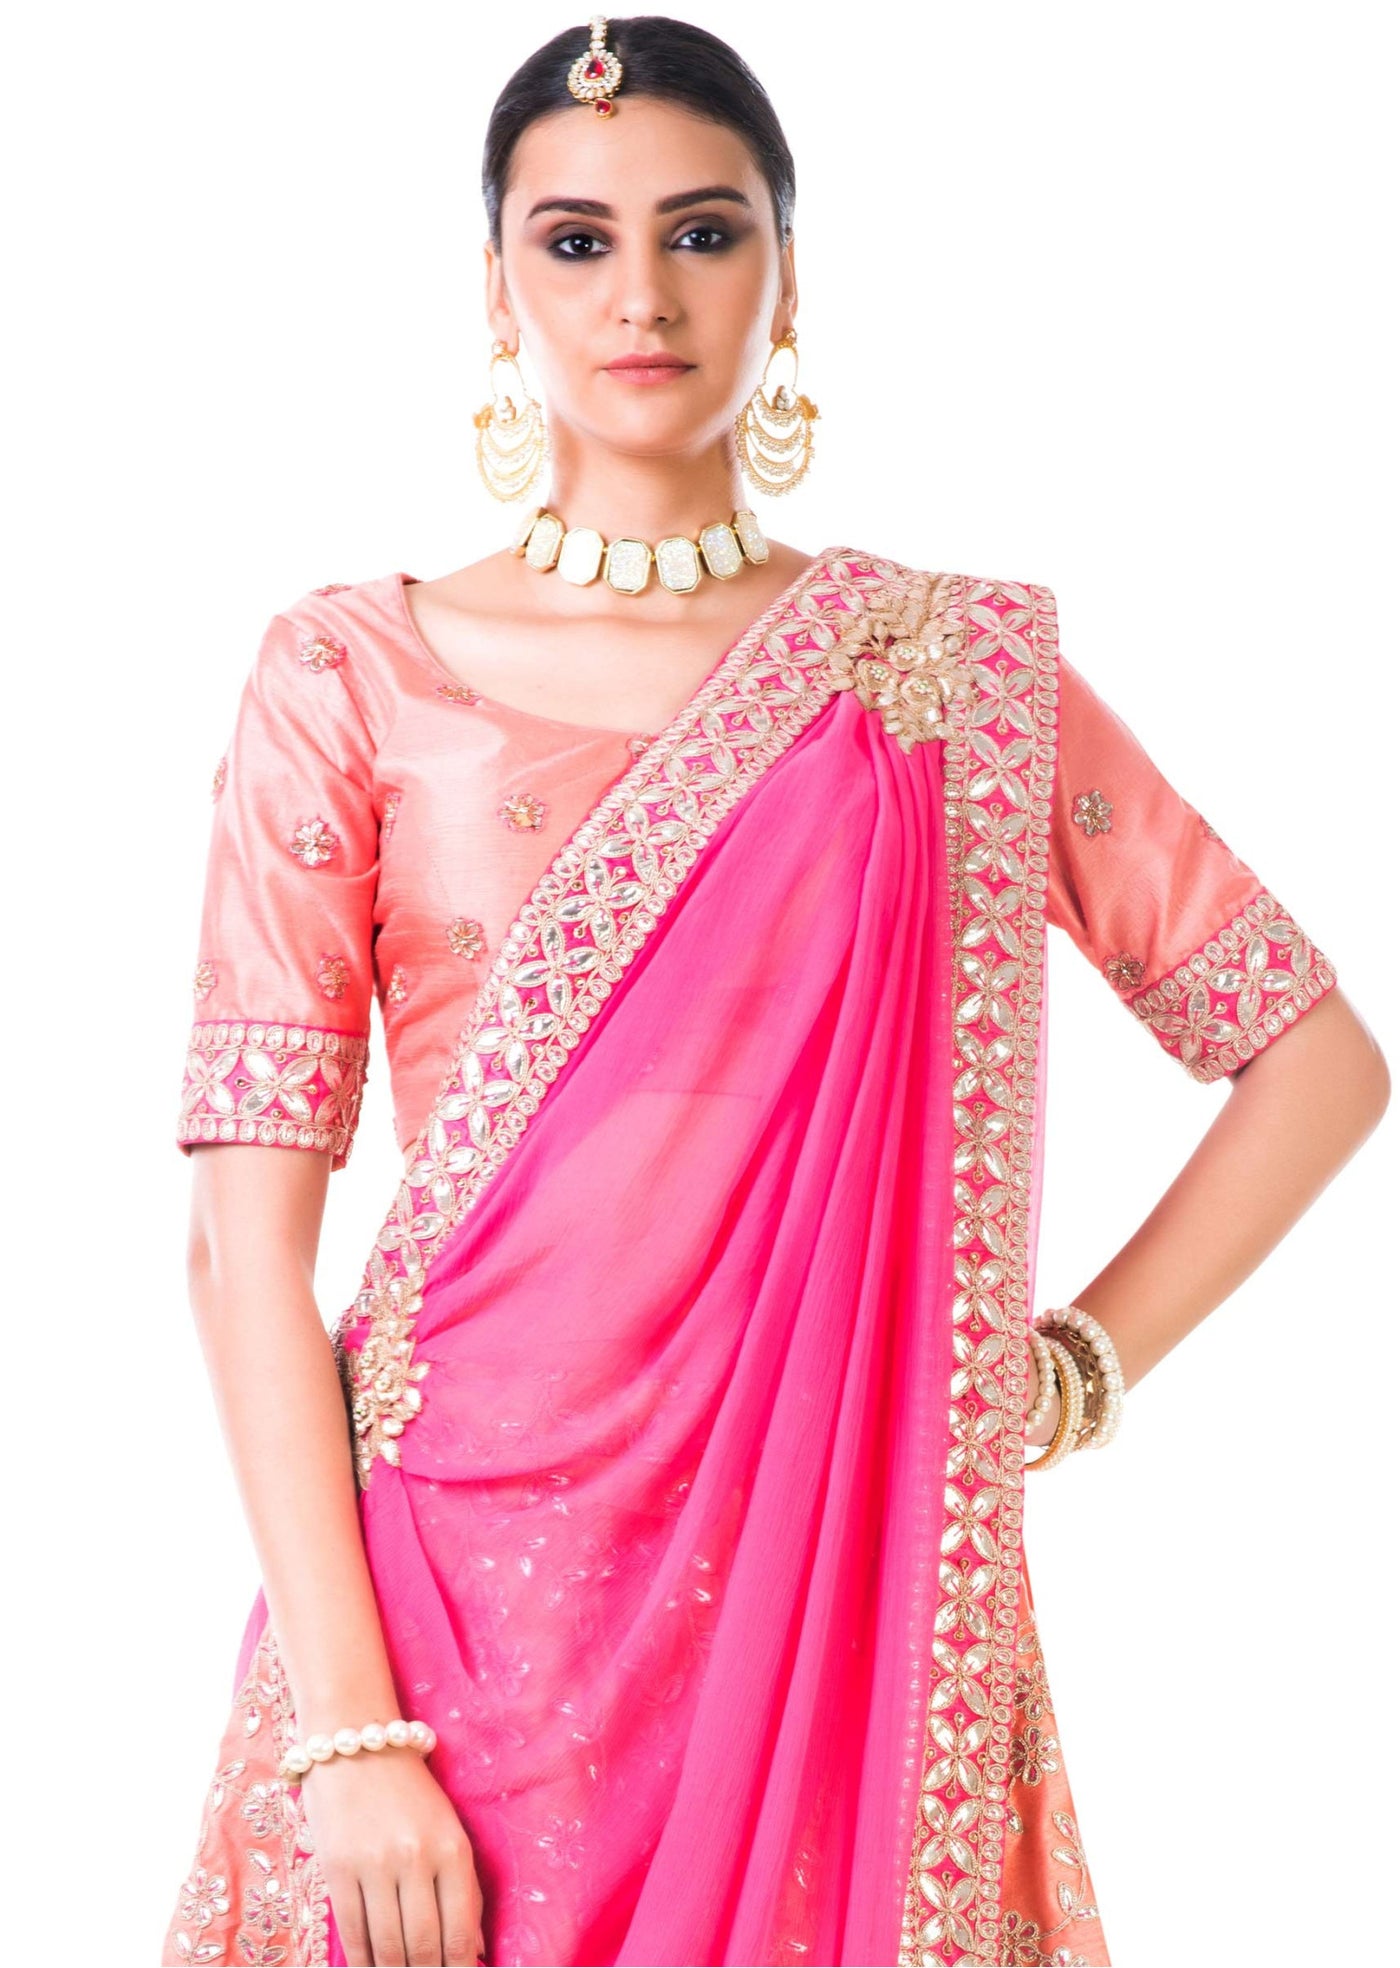 Peach Work Lehenga - Indian Clothing in Denver, CO, Aurora, CO, Boulder, CO, Fort Collins, CO, Colorado Springs, CO, Parker, CO, Highlands Ranch, CO, Cherry Creek, CO, Centennial, CO, and Longmont, CO. Nationwide shipping USA - India Fashion X